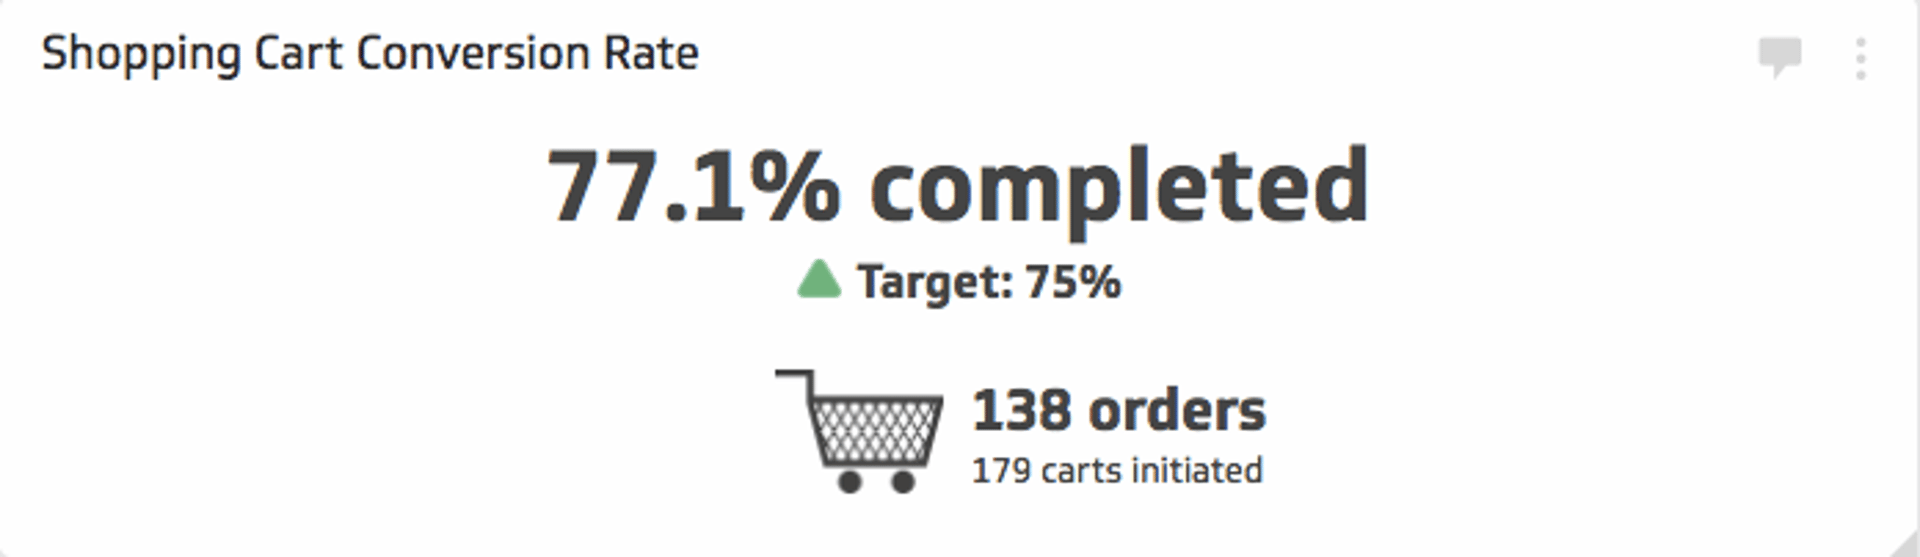 Ecommerce KPI Example - Shopping Cart Conversion Rate Metric